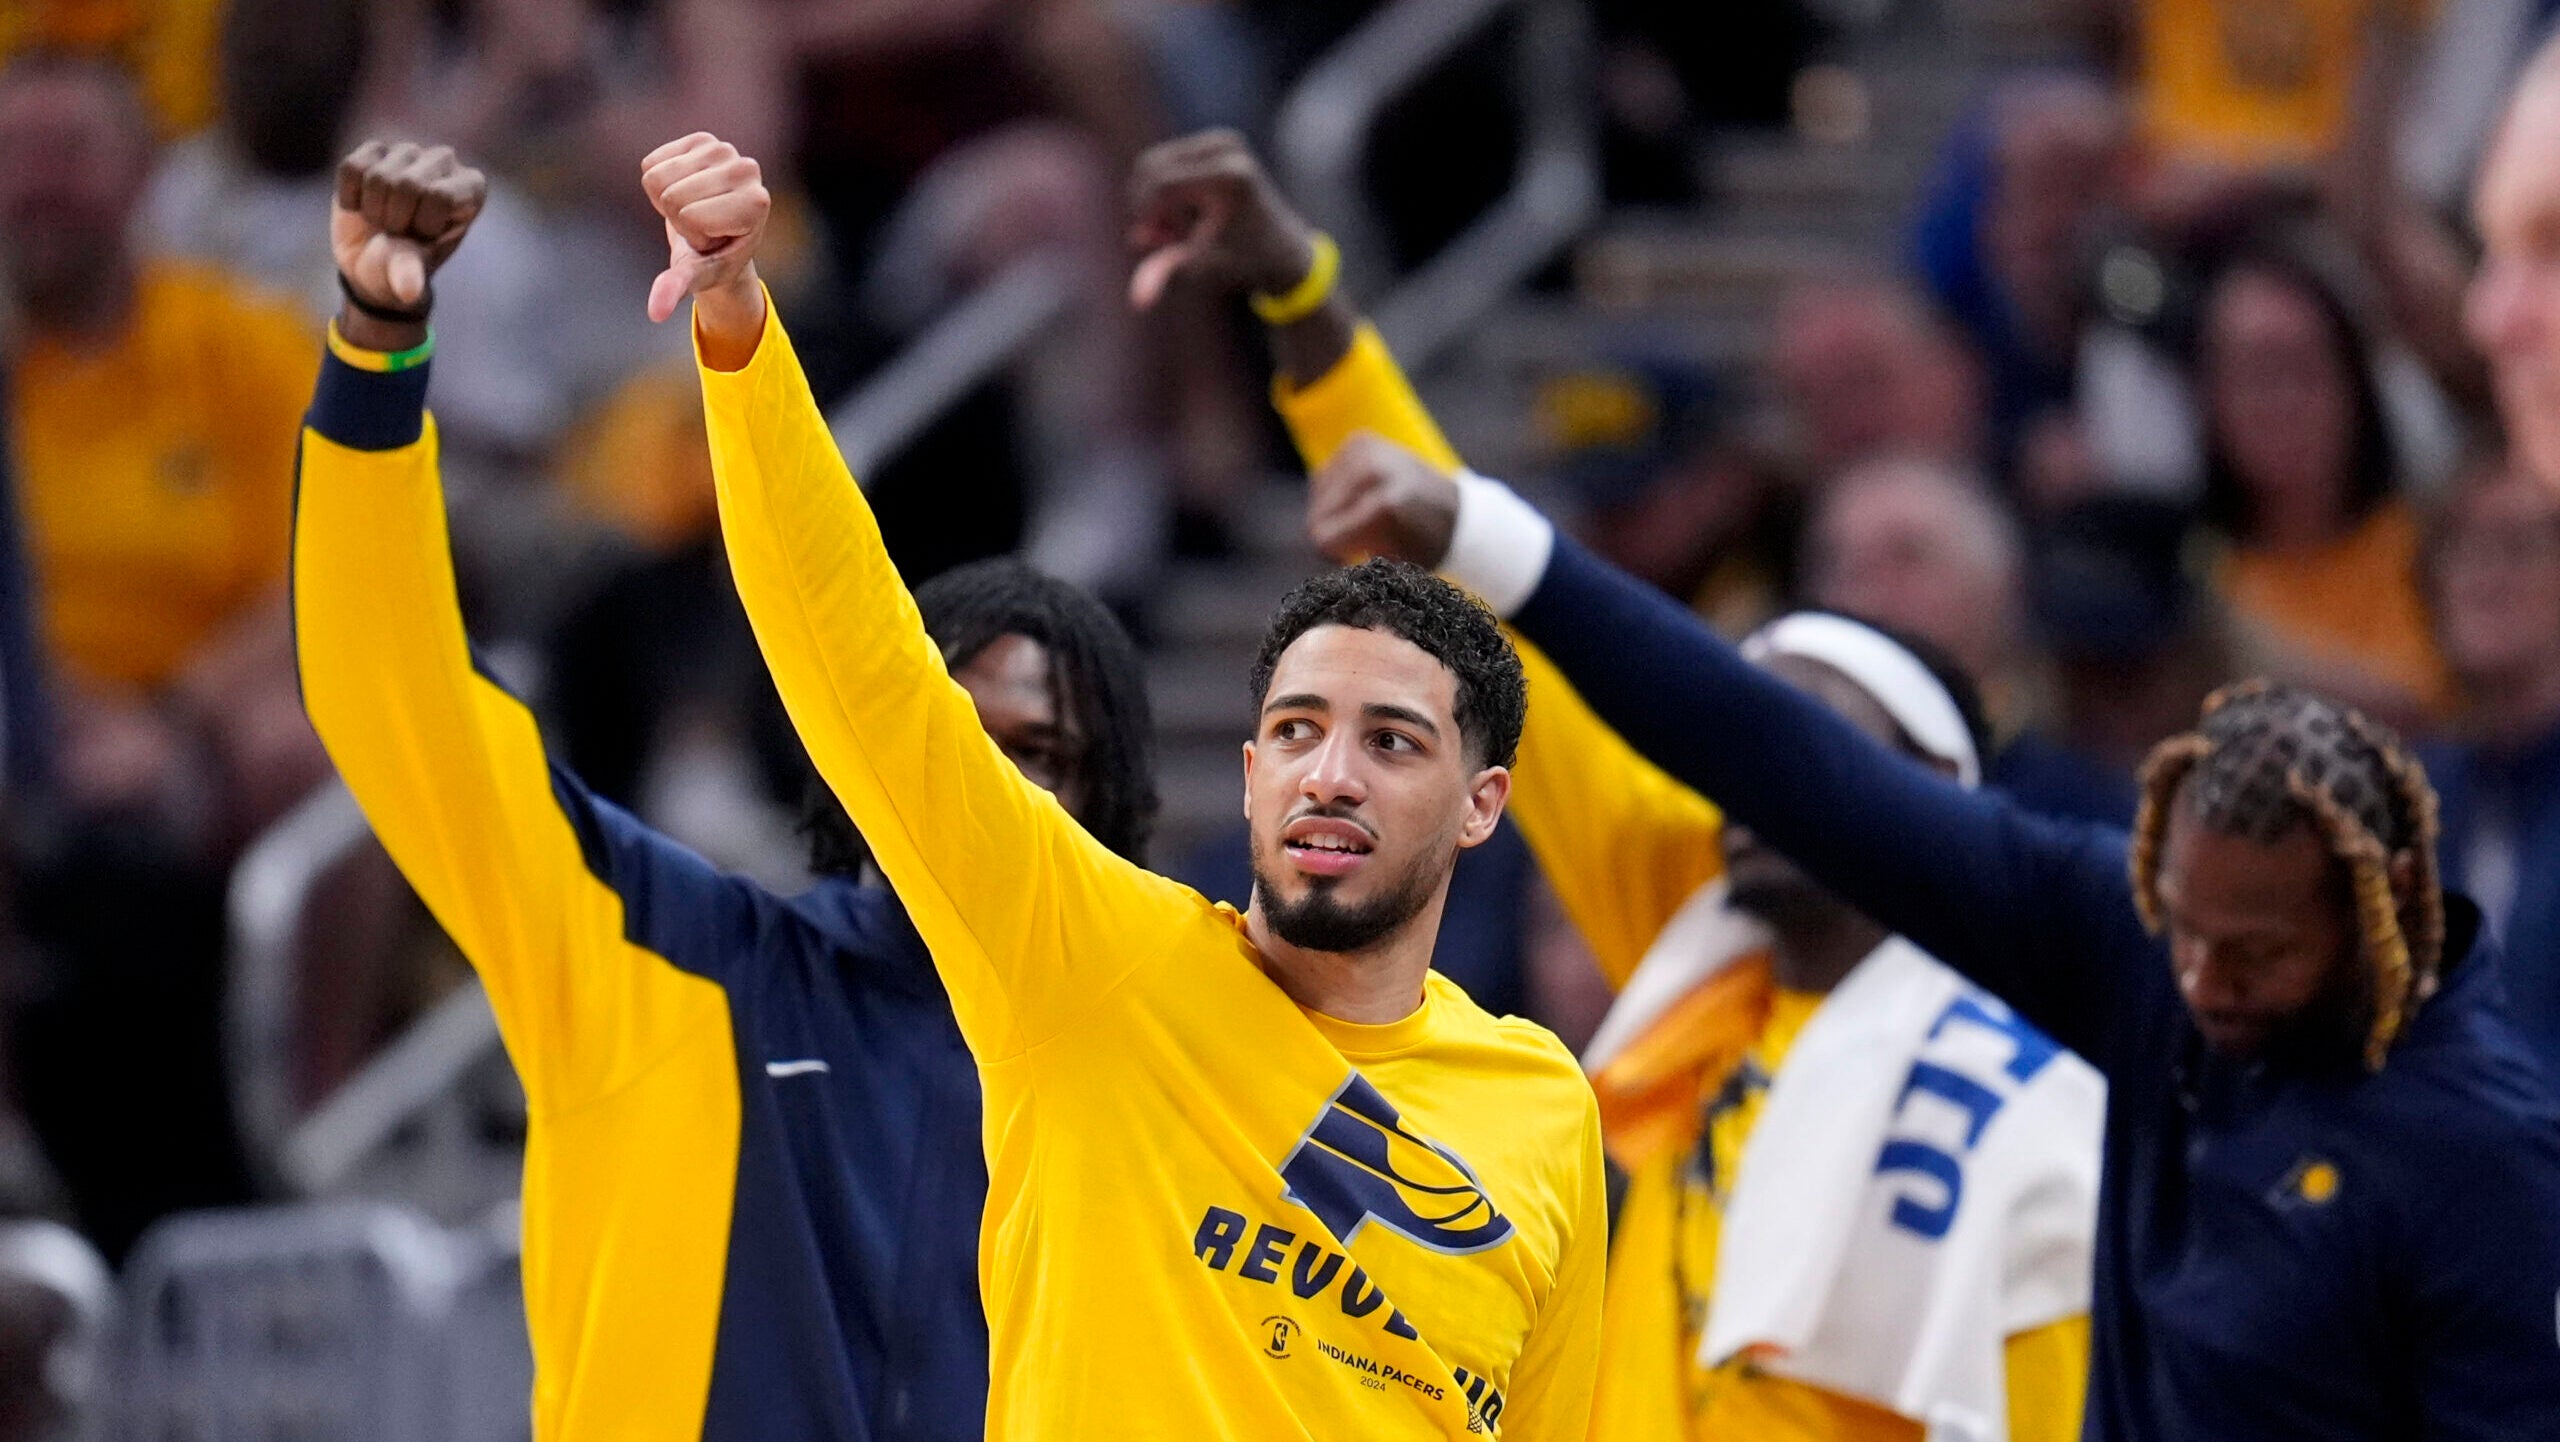 Explosive first quarter fuels Pacers' Game 4 win over Knicks